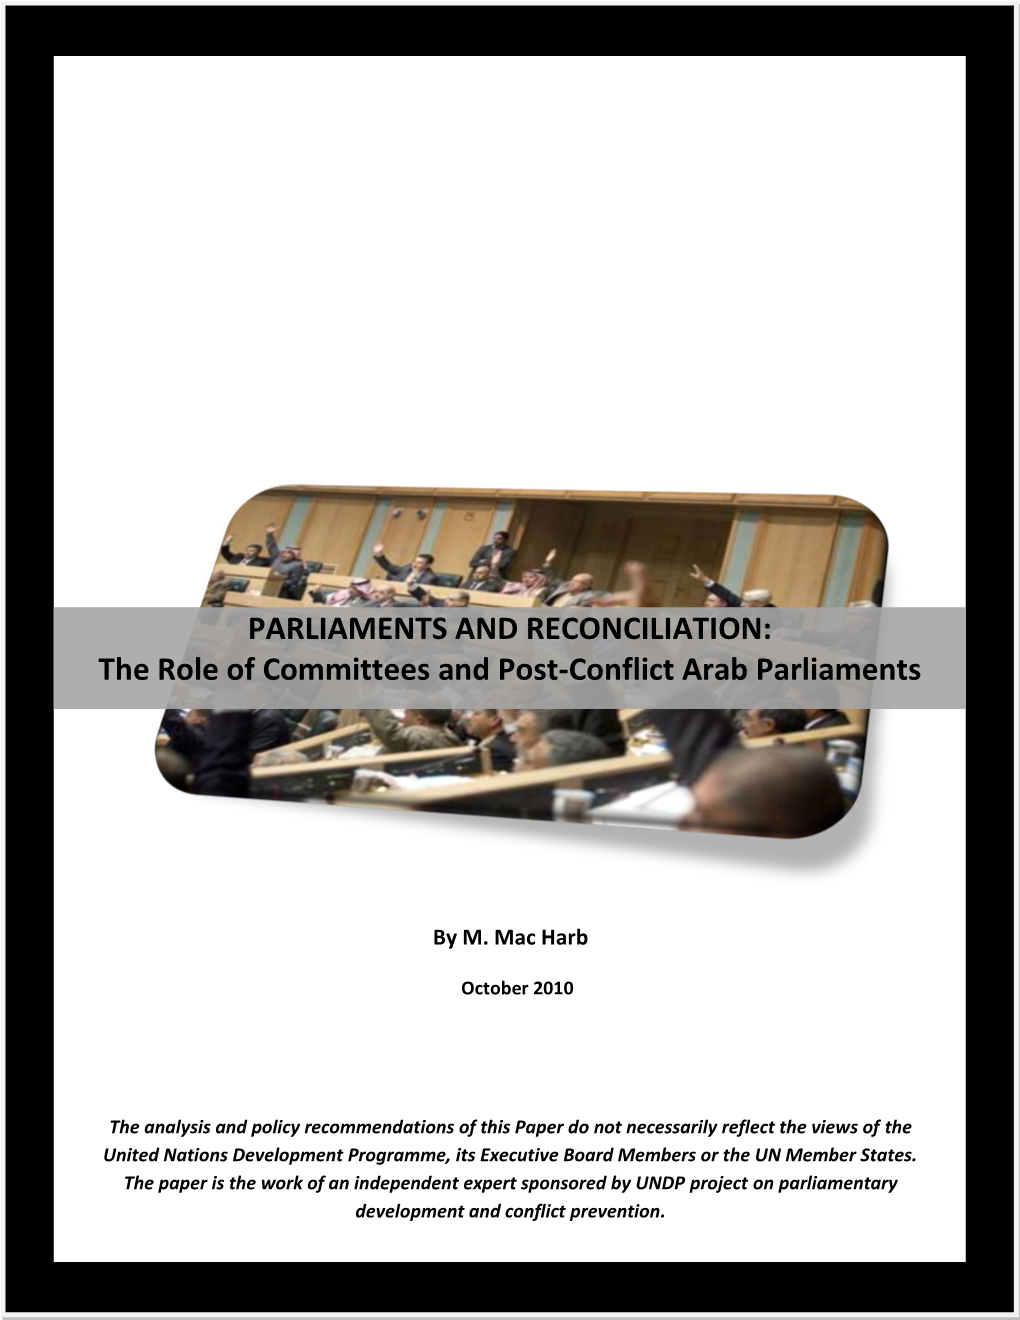 PARLIAMENTS and RECONCILIATION: the Role of Committees and Post-Conflict Arab Parliaments